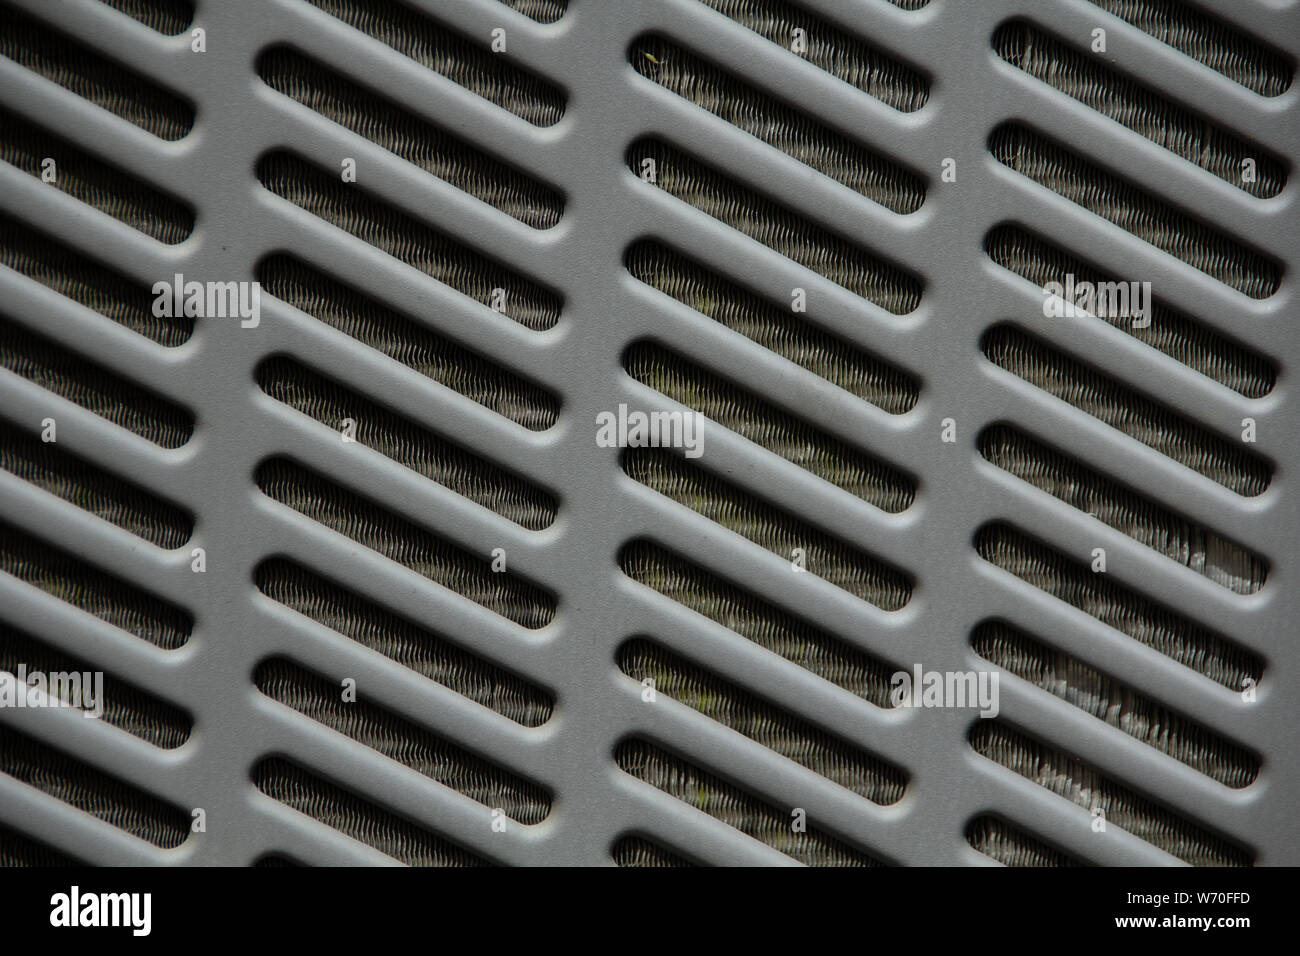 Grey Pool Heater grate background Stock Photo